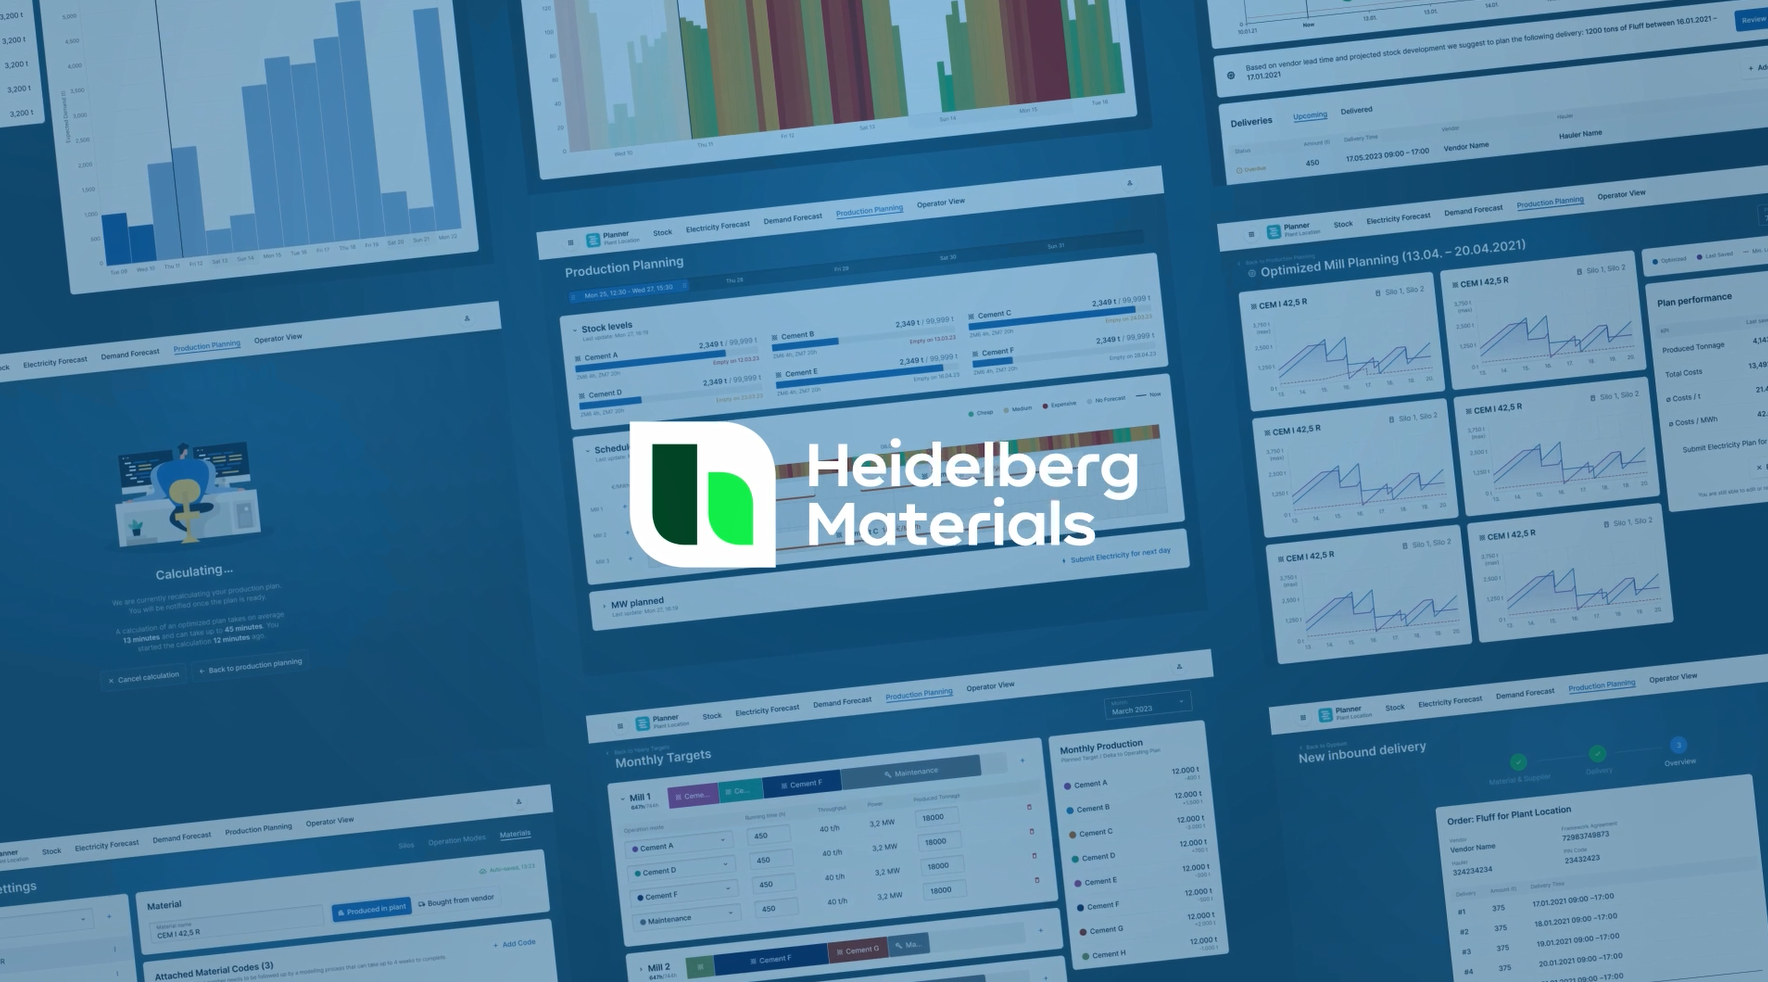 Numerous bar and line graphics and numbers can be seen on a blue background, with the Heidelberg Materials logo in the foreground.